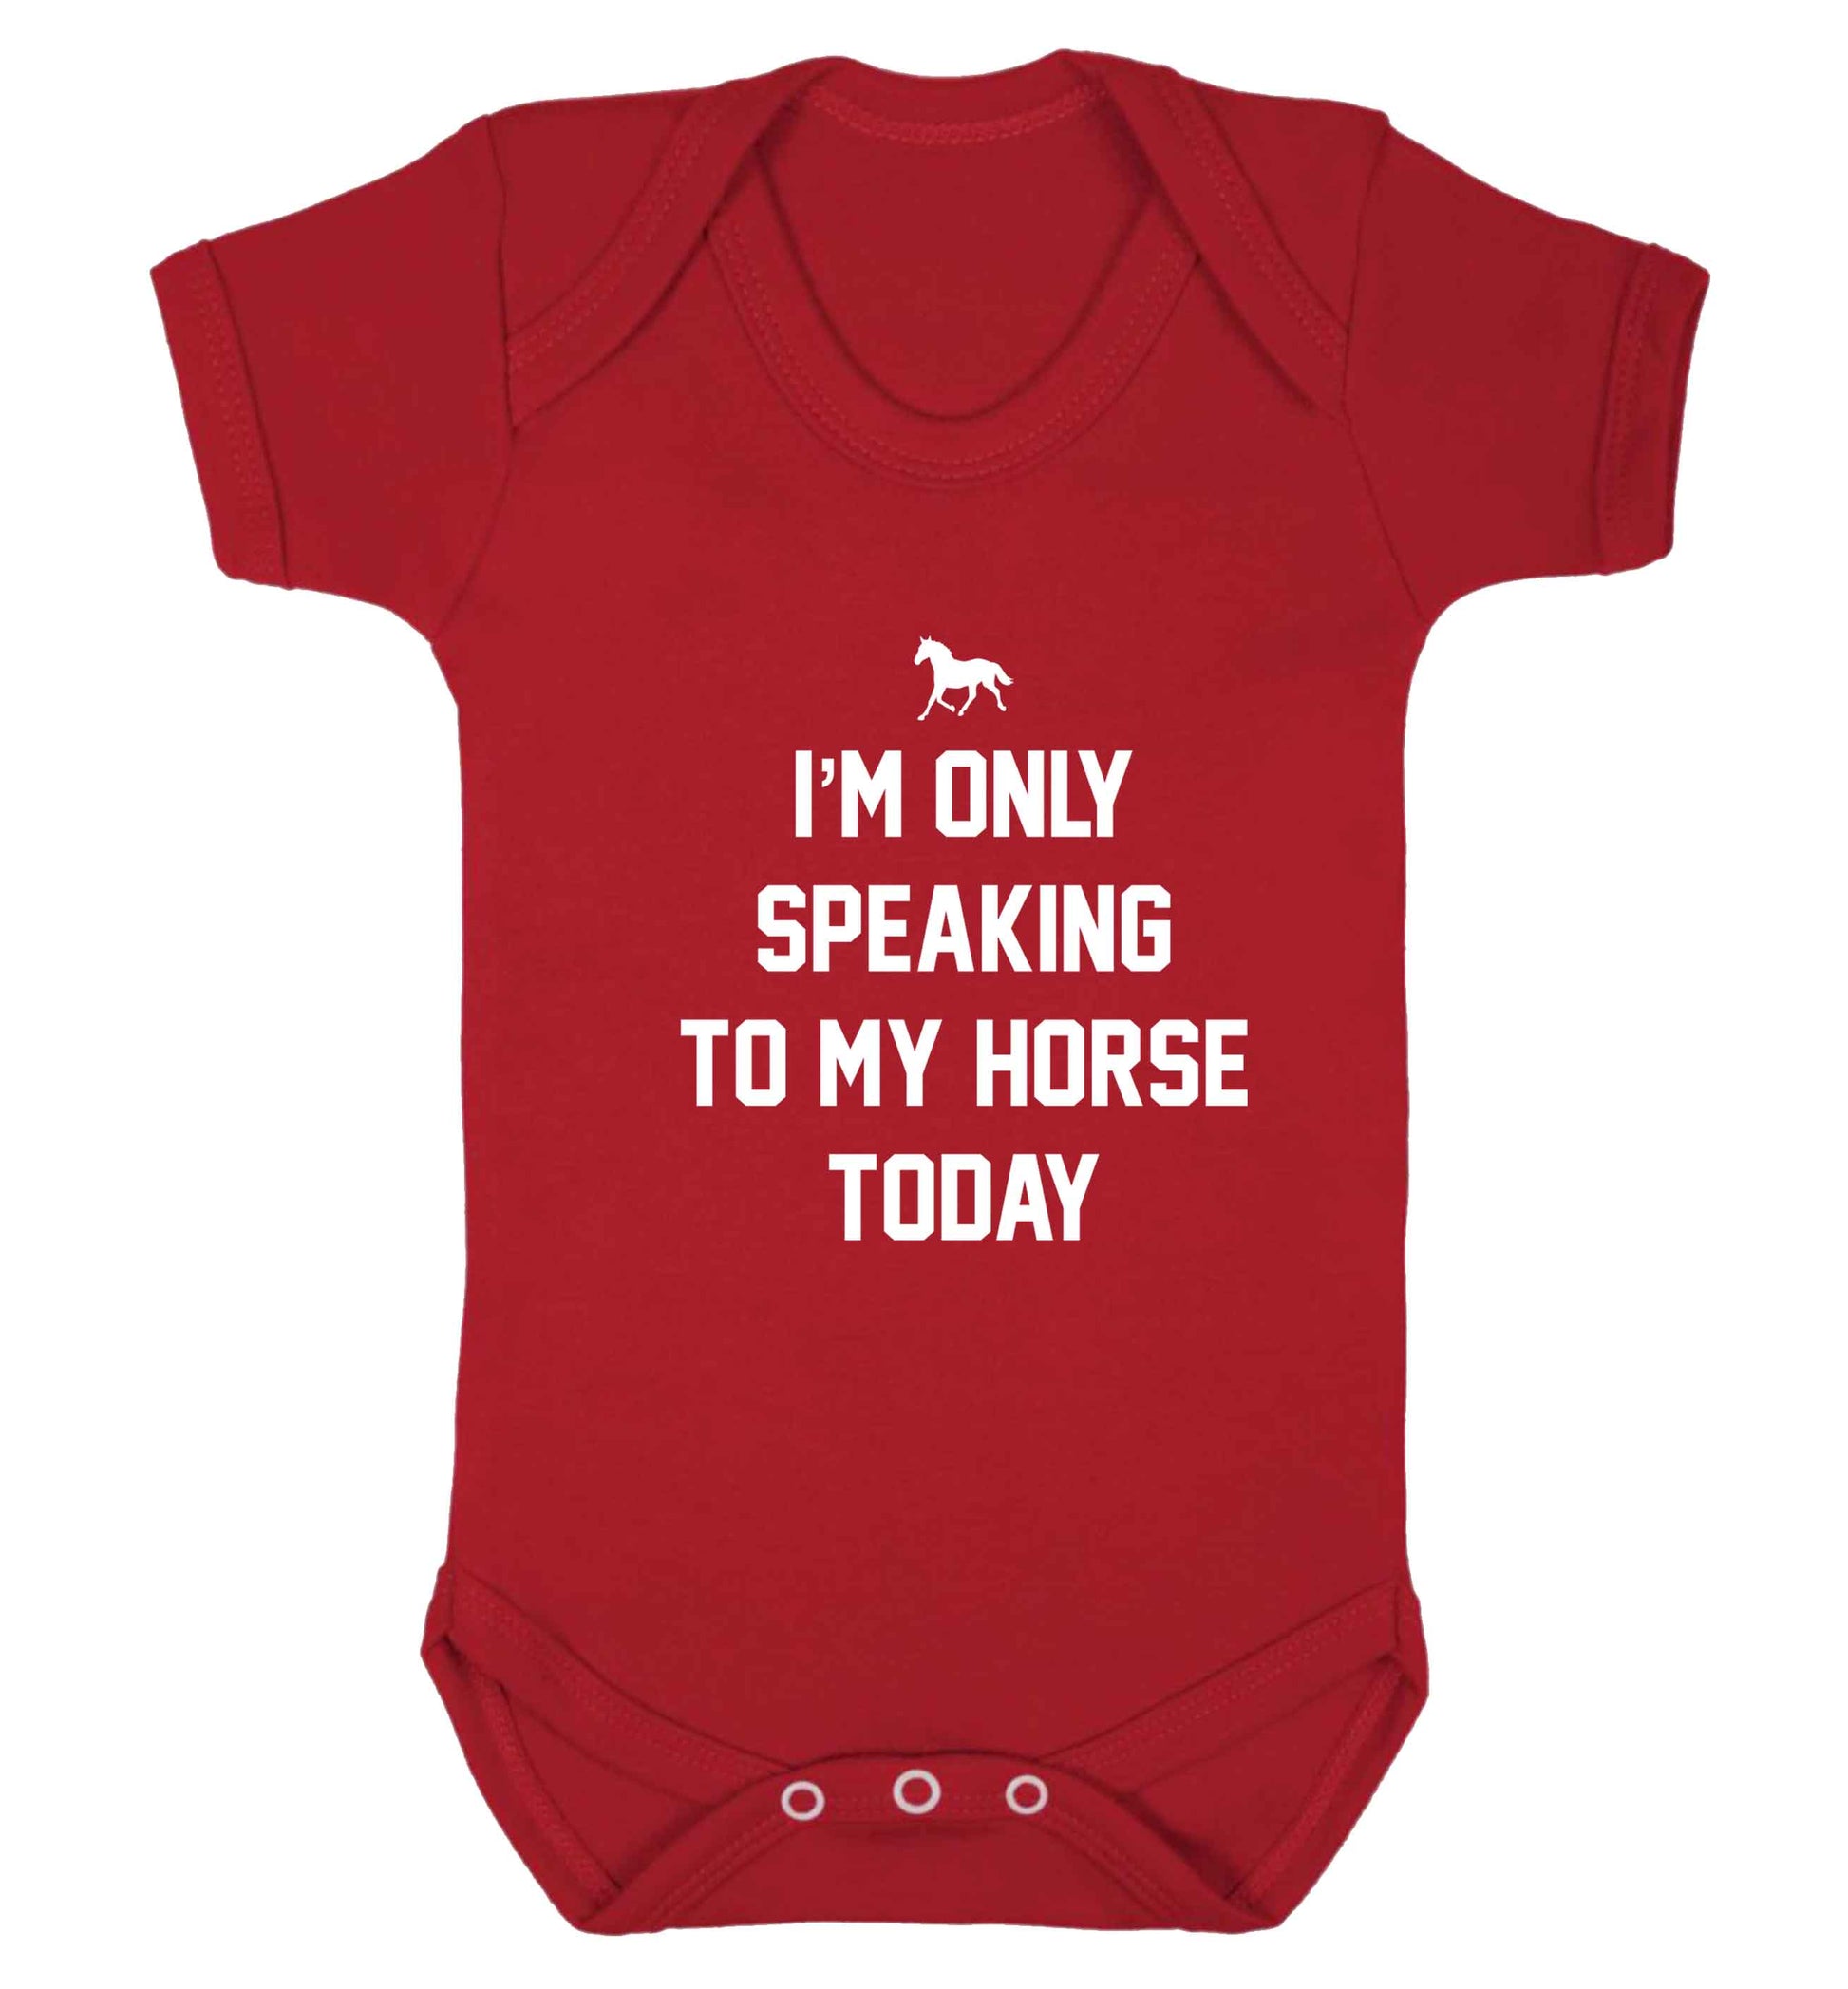 I'm only speaking to my horse today baby vest red 18-24 months